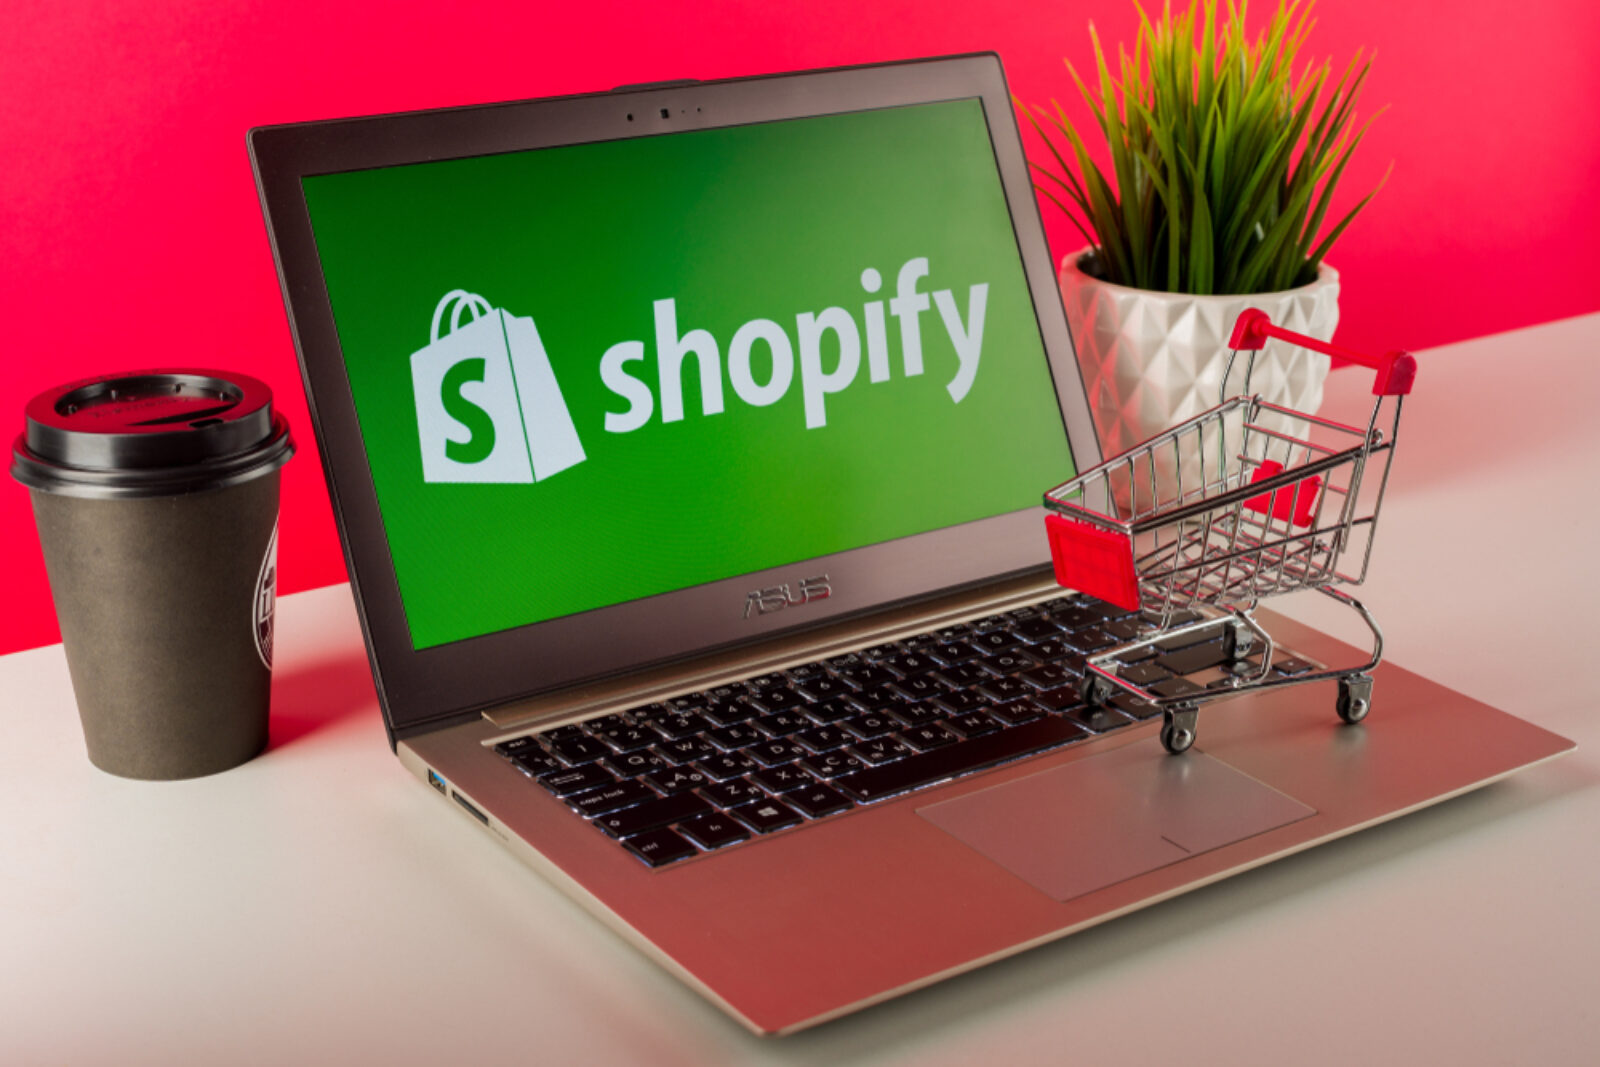 SHOPIFY is The Platform for E-commerce Industry